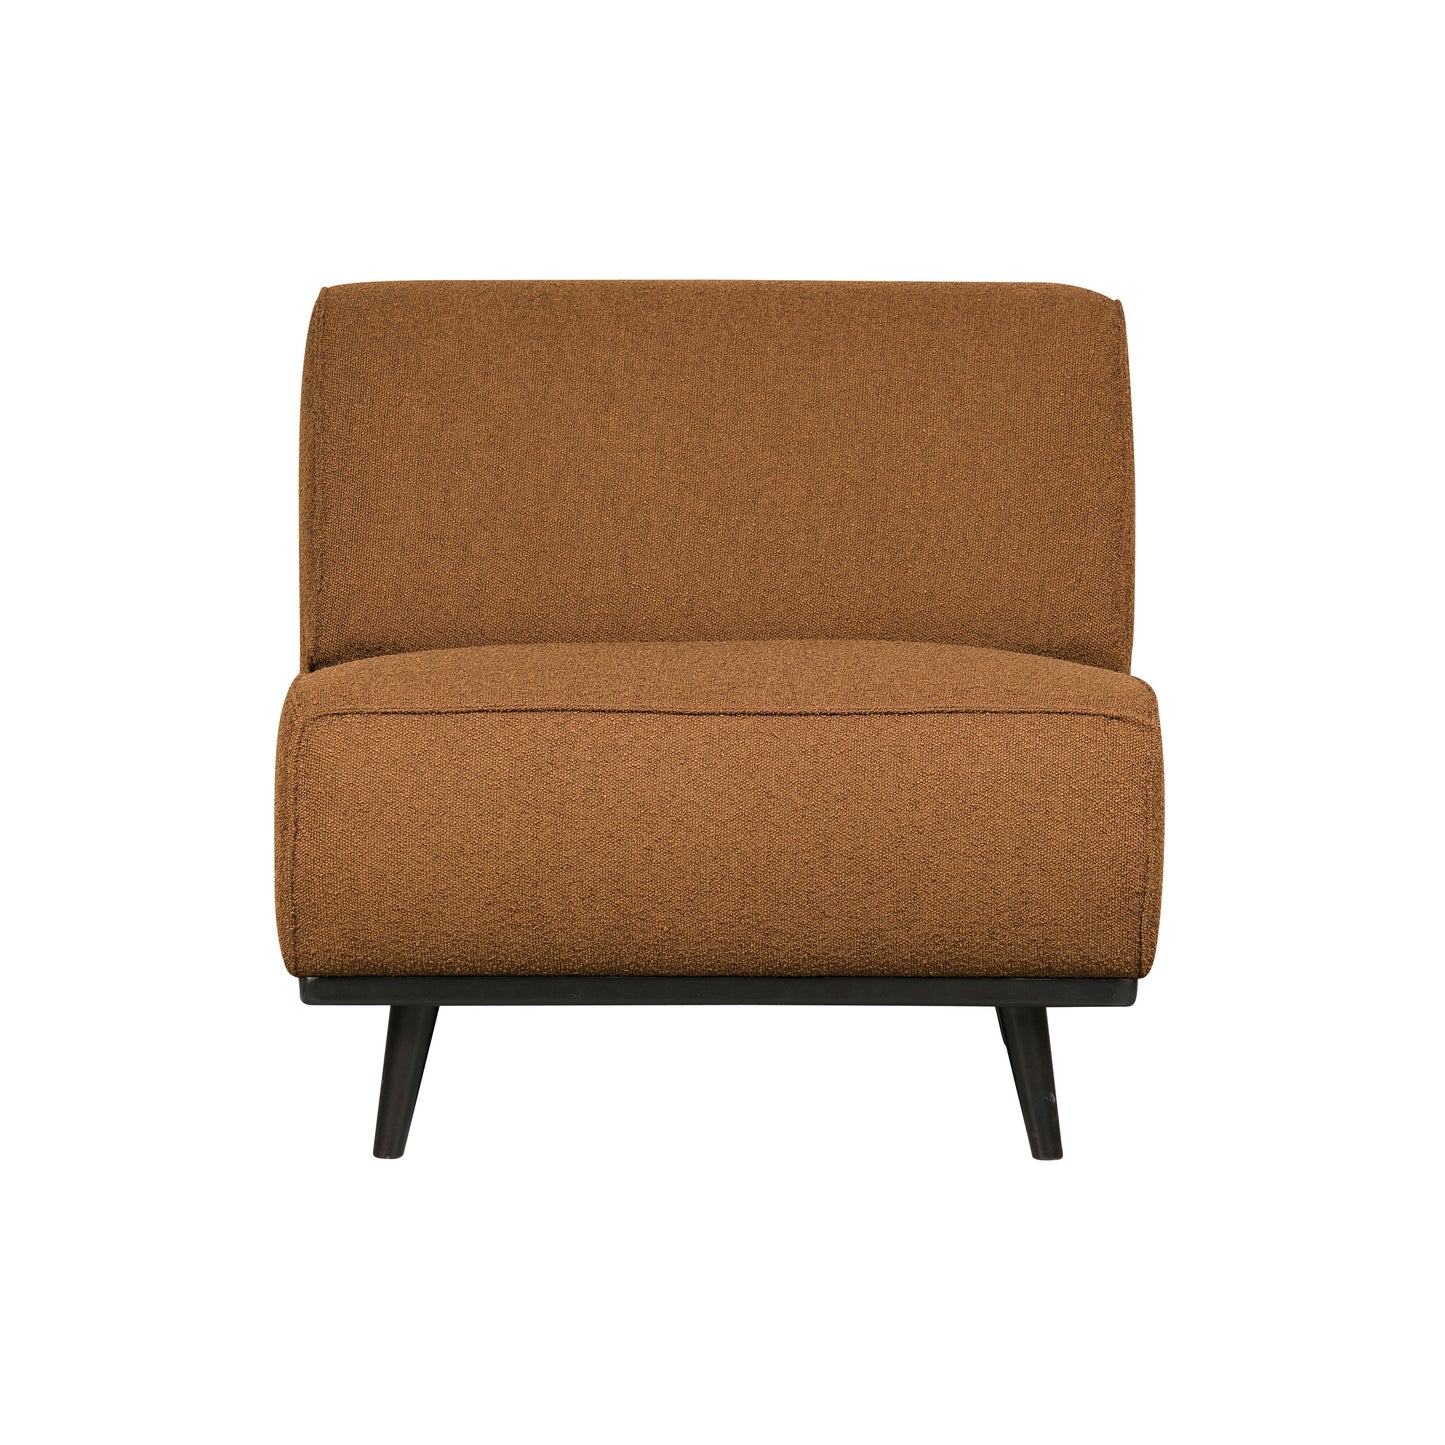 Statement Chair Boucle Butter